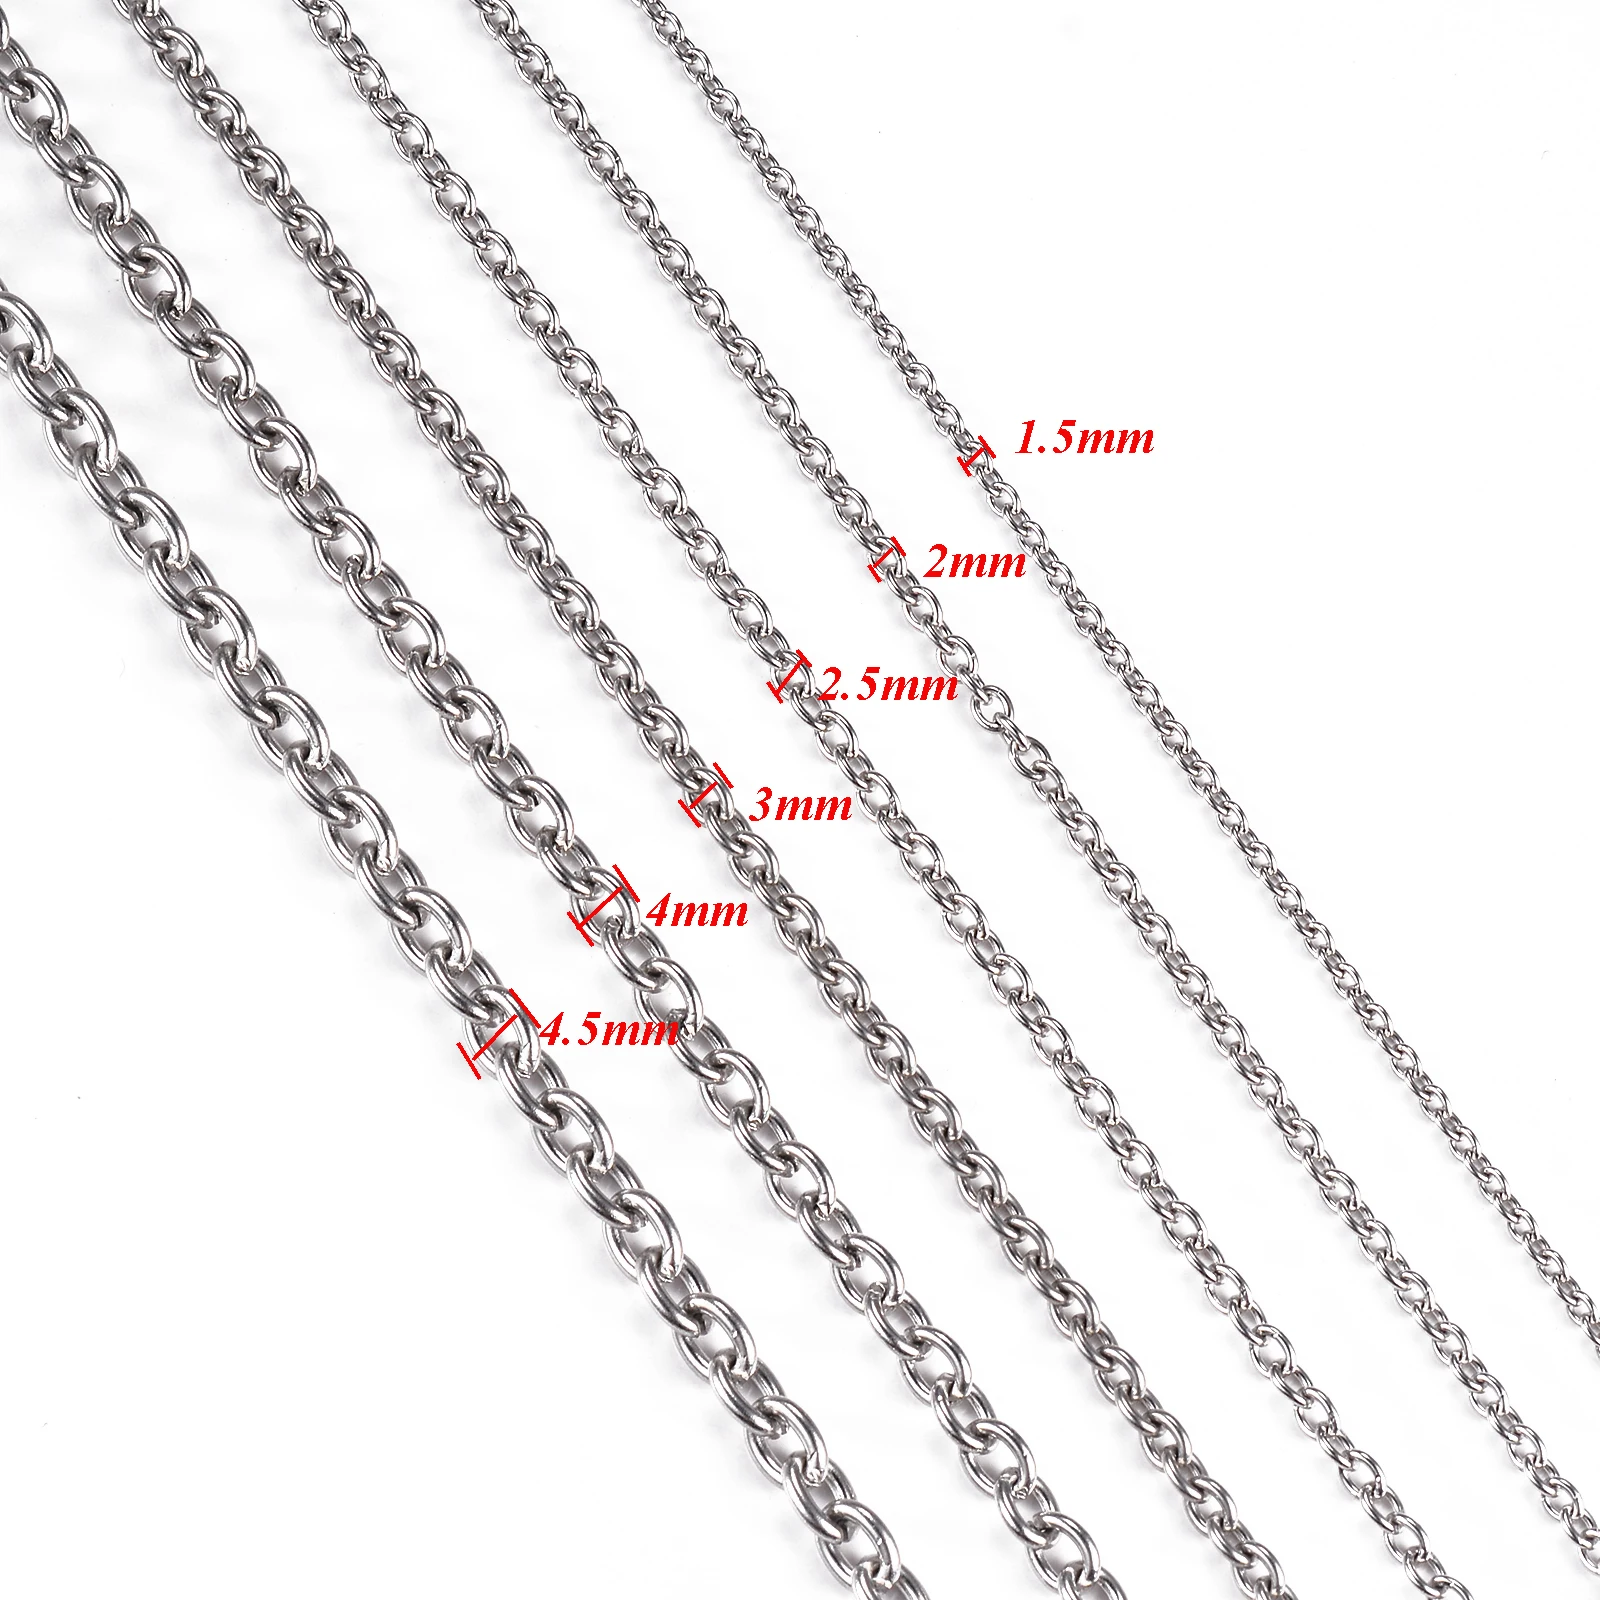 2.5mm Width Stainless Steel Chain Necklace Wholesale